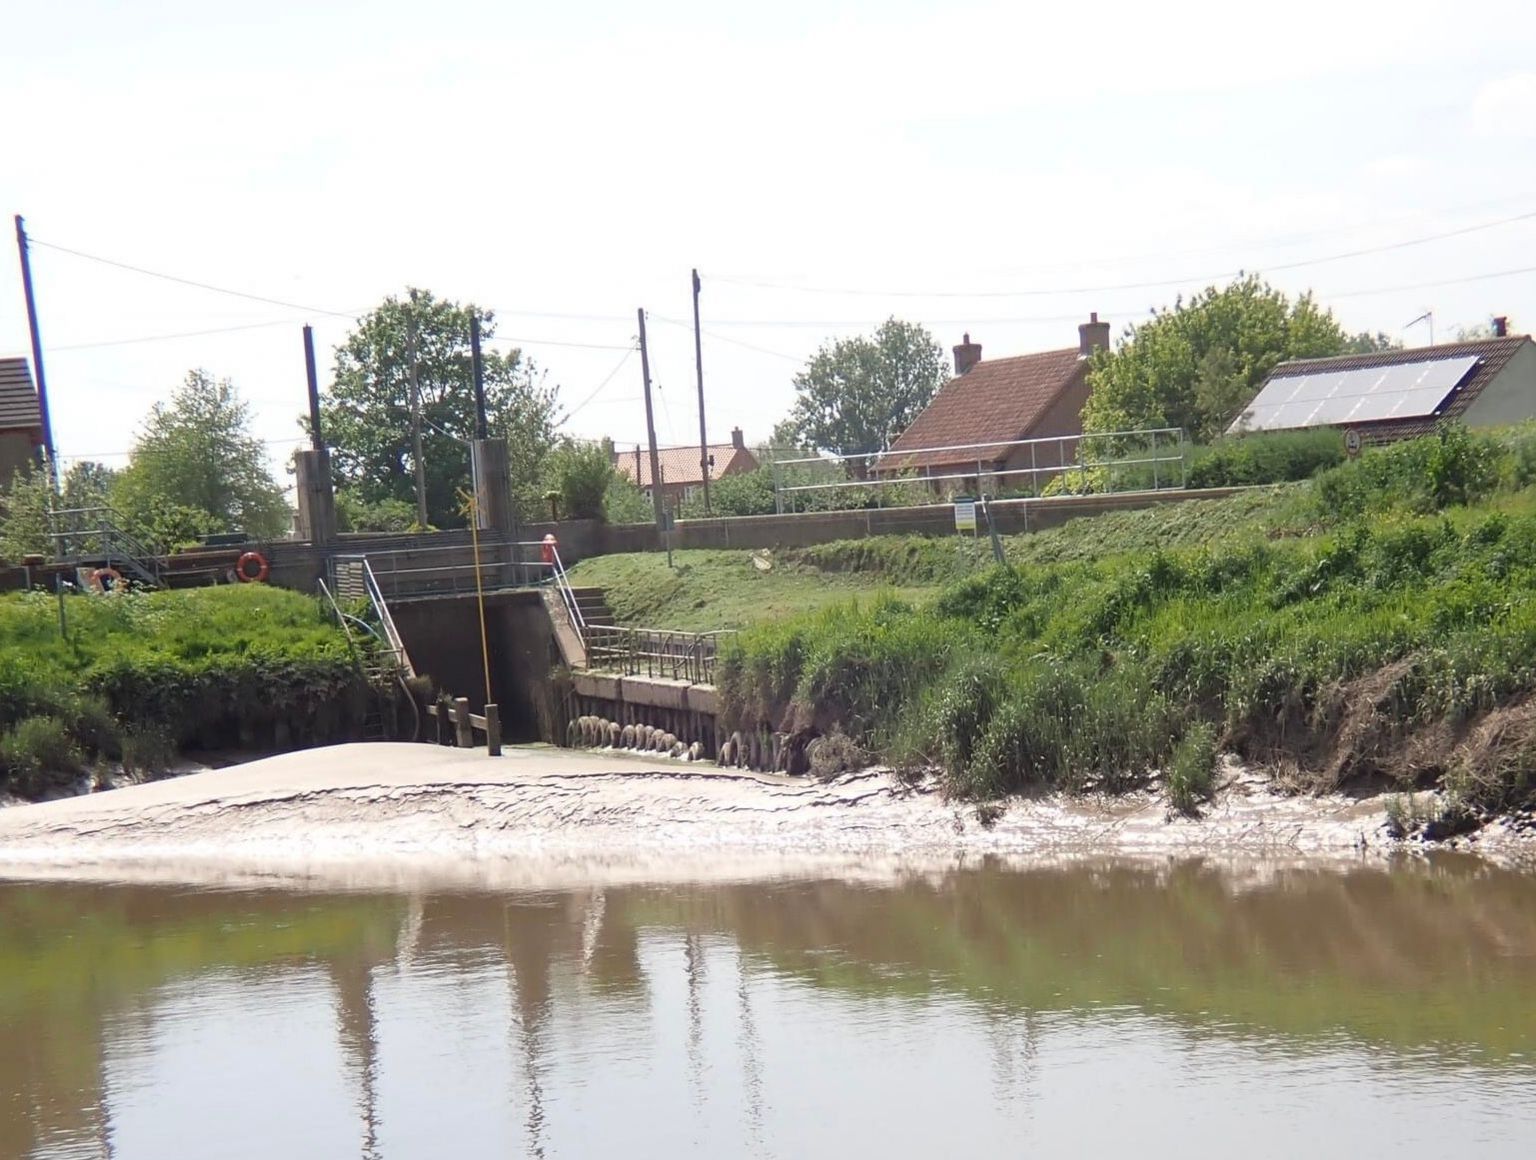 Image of the silt built up at Salters Lode on the River Great Ouse side